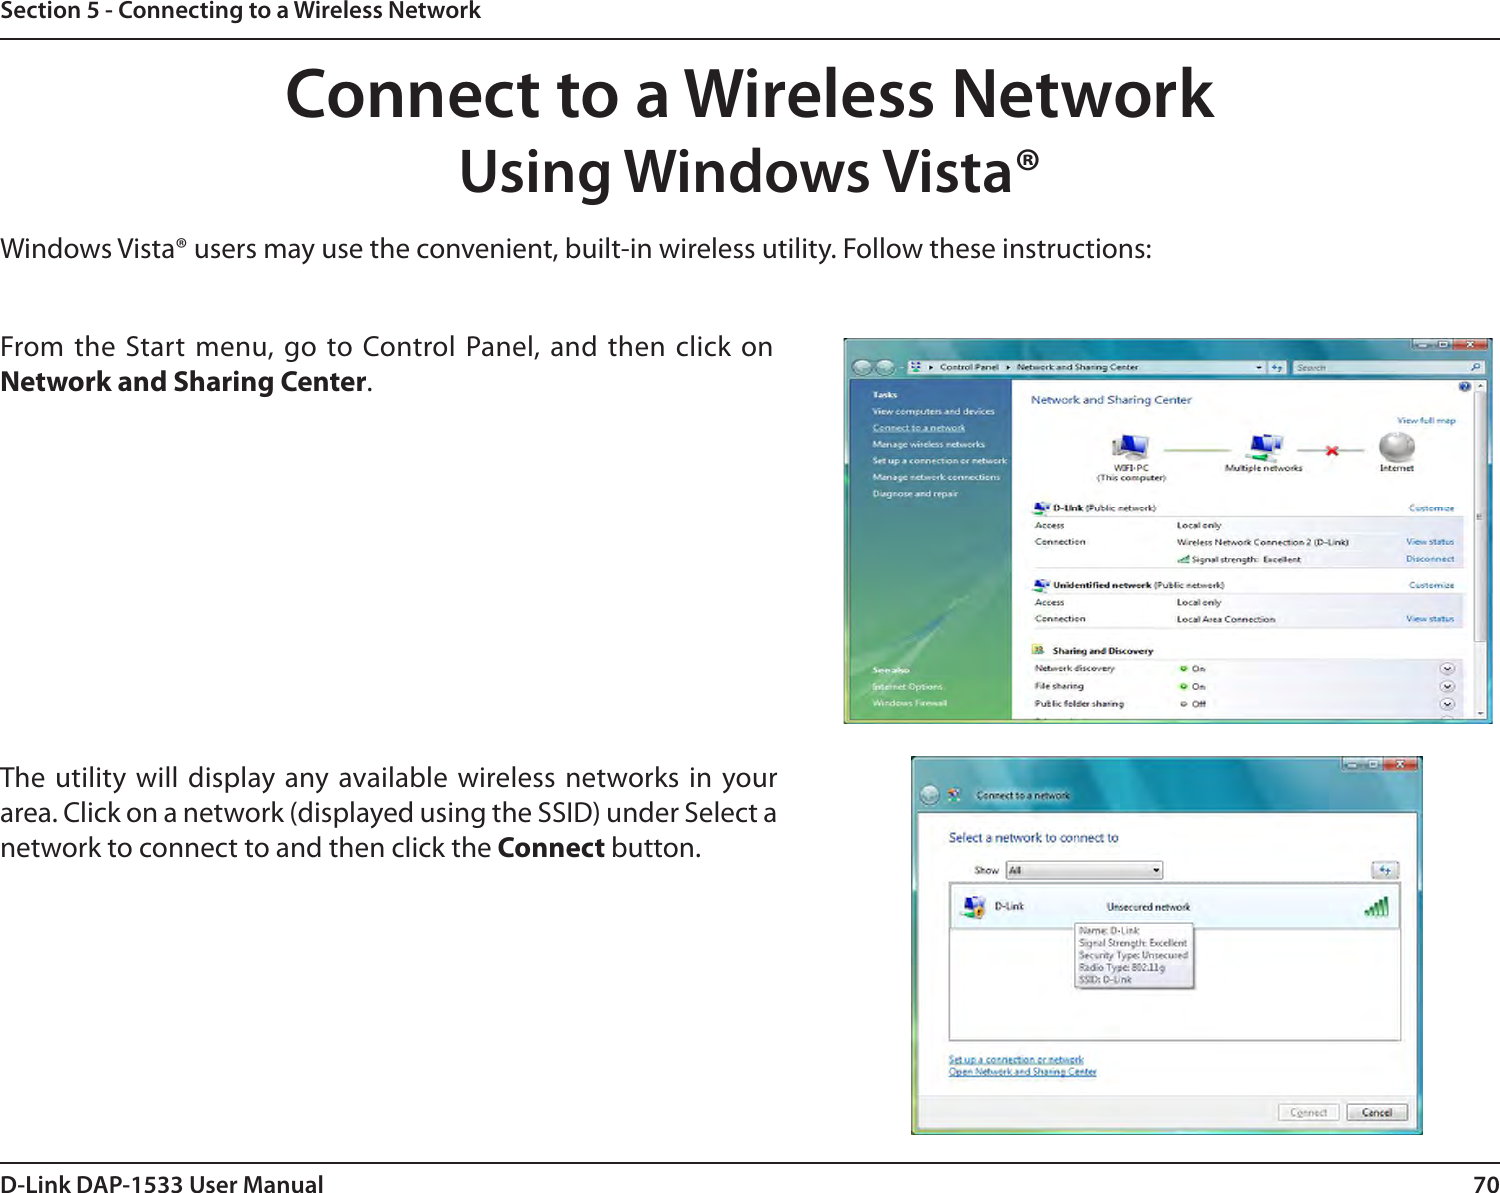 70D-Link DAP-1533 User ManualSection 5 - Connecting to a Wireless NetworkConnect to a Wireless NetworkUsing Windows Vista®Windows Vista® users may use the convenient, built-in wireless utility. Follow these instructions: From the Start  menu, go to Control Panel, and  then  click  on Network and Sharing Center. The utility will display any available wireless networks in your area. Click on a network (displayed using the SSID) under Select a network to connect to and then click the Connect button.